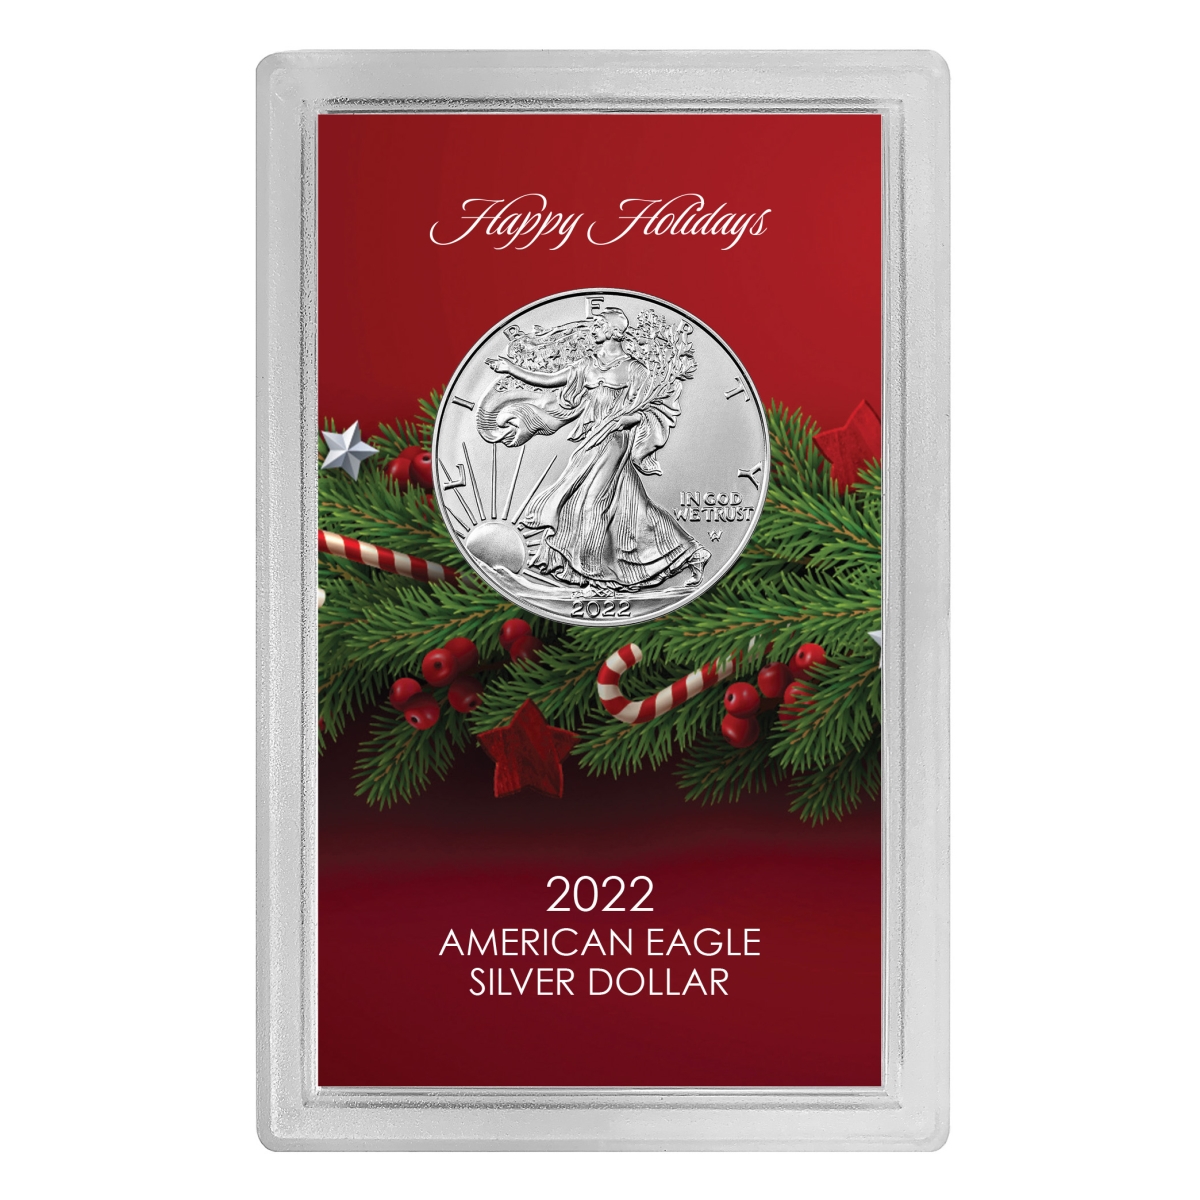 Picture of American Coin Treasures 17112 3 x 5 in. Happy Holidays American Eagle Dollar Coin, Silver